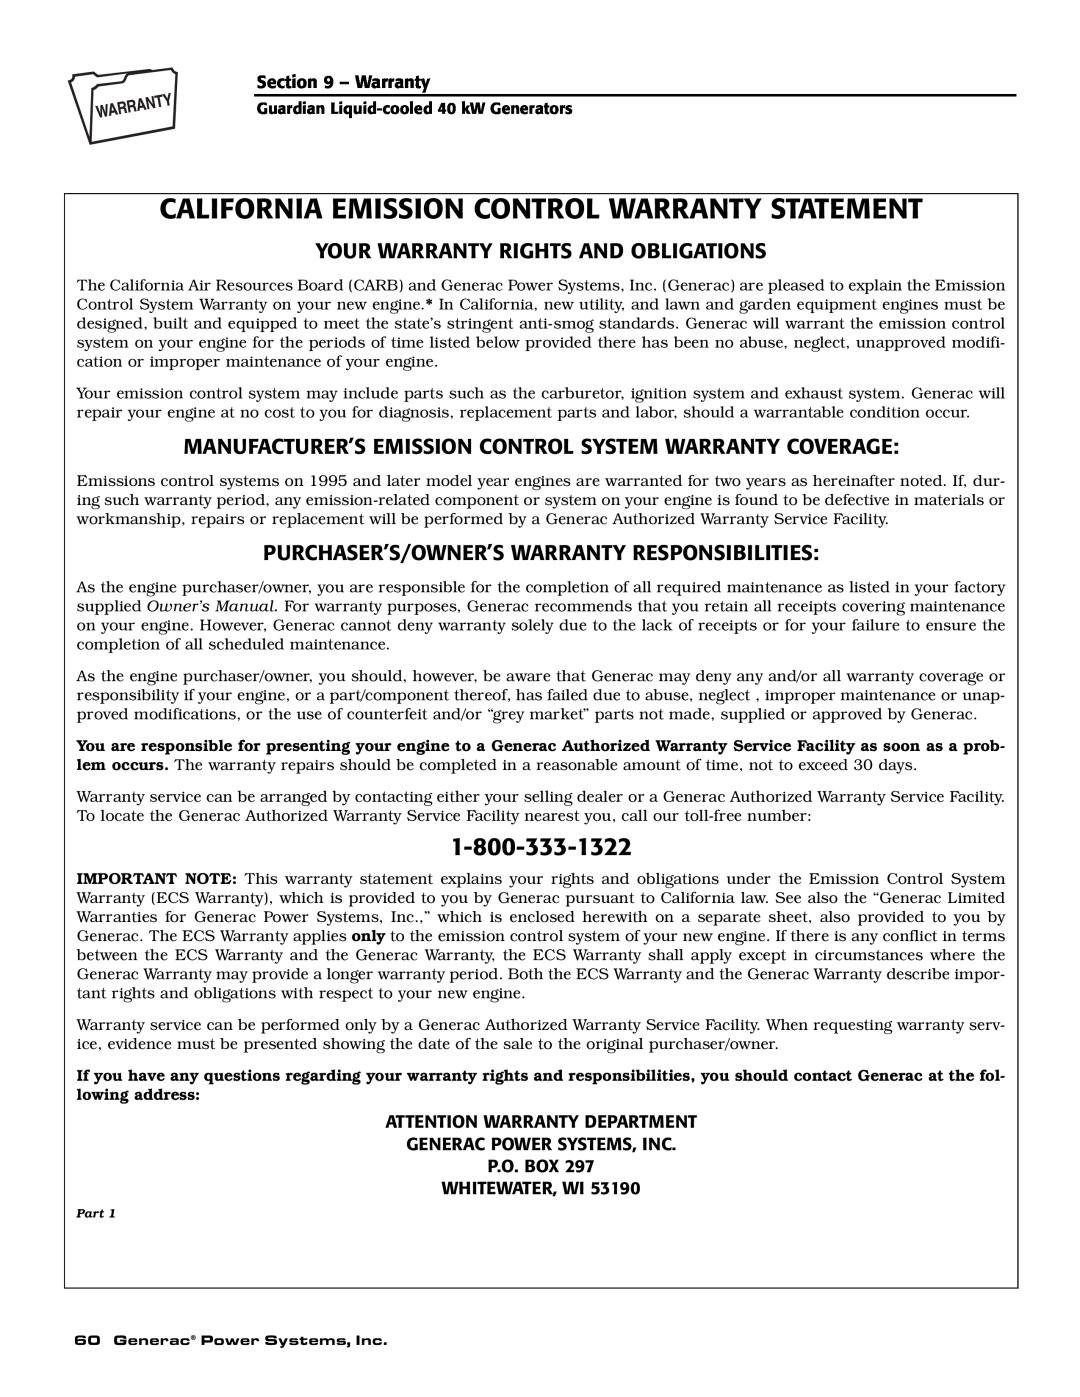 Generac Power Systems 46263 Your Warranty Rights And Obligations, Manufacturer’S Emission Control System Warranty Coverage 